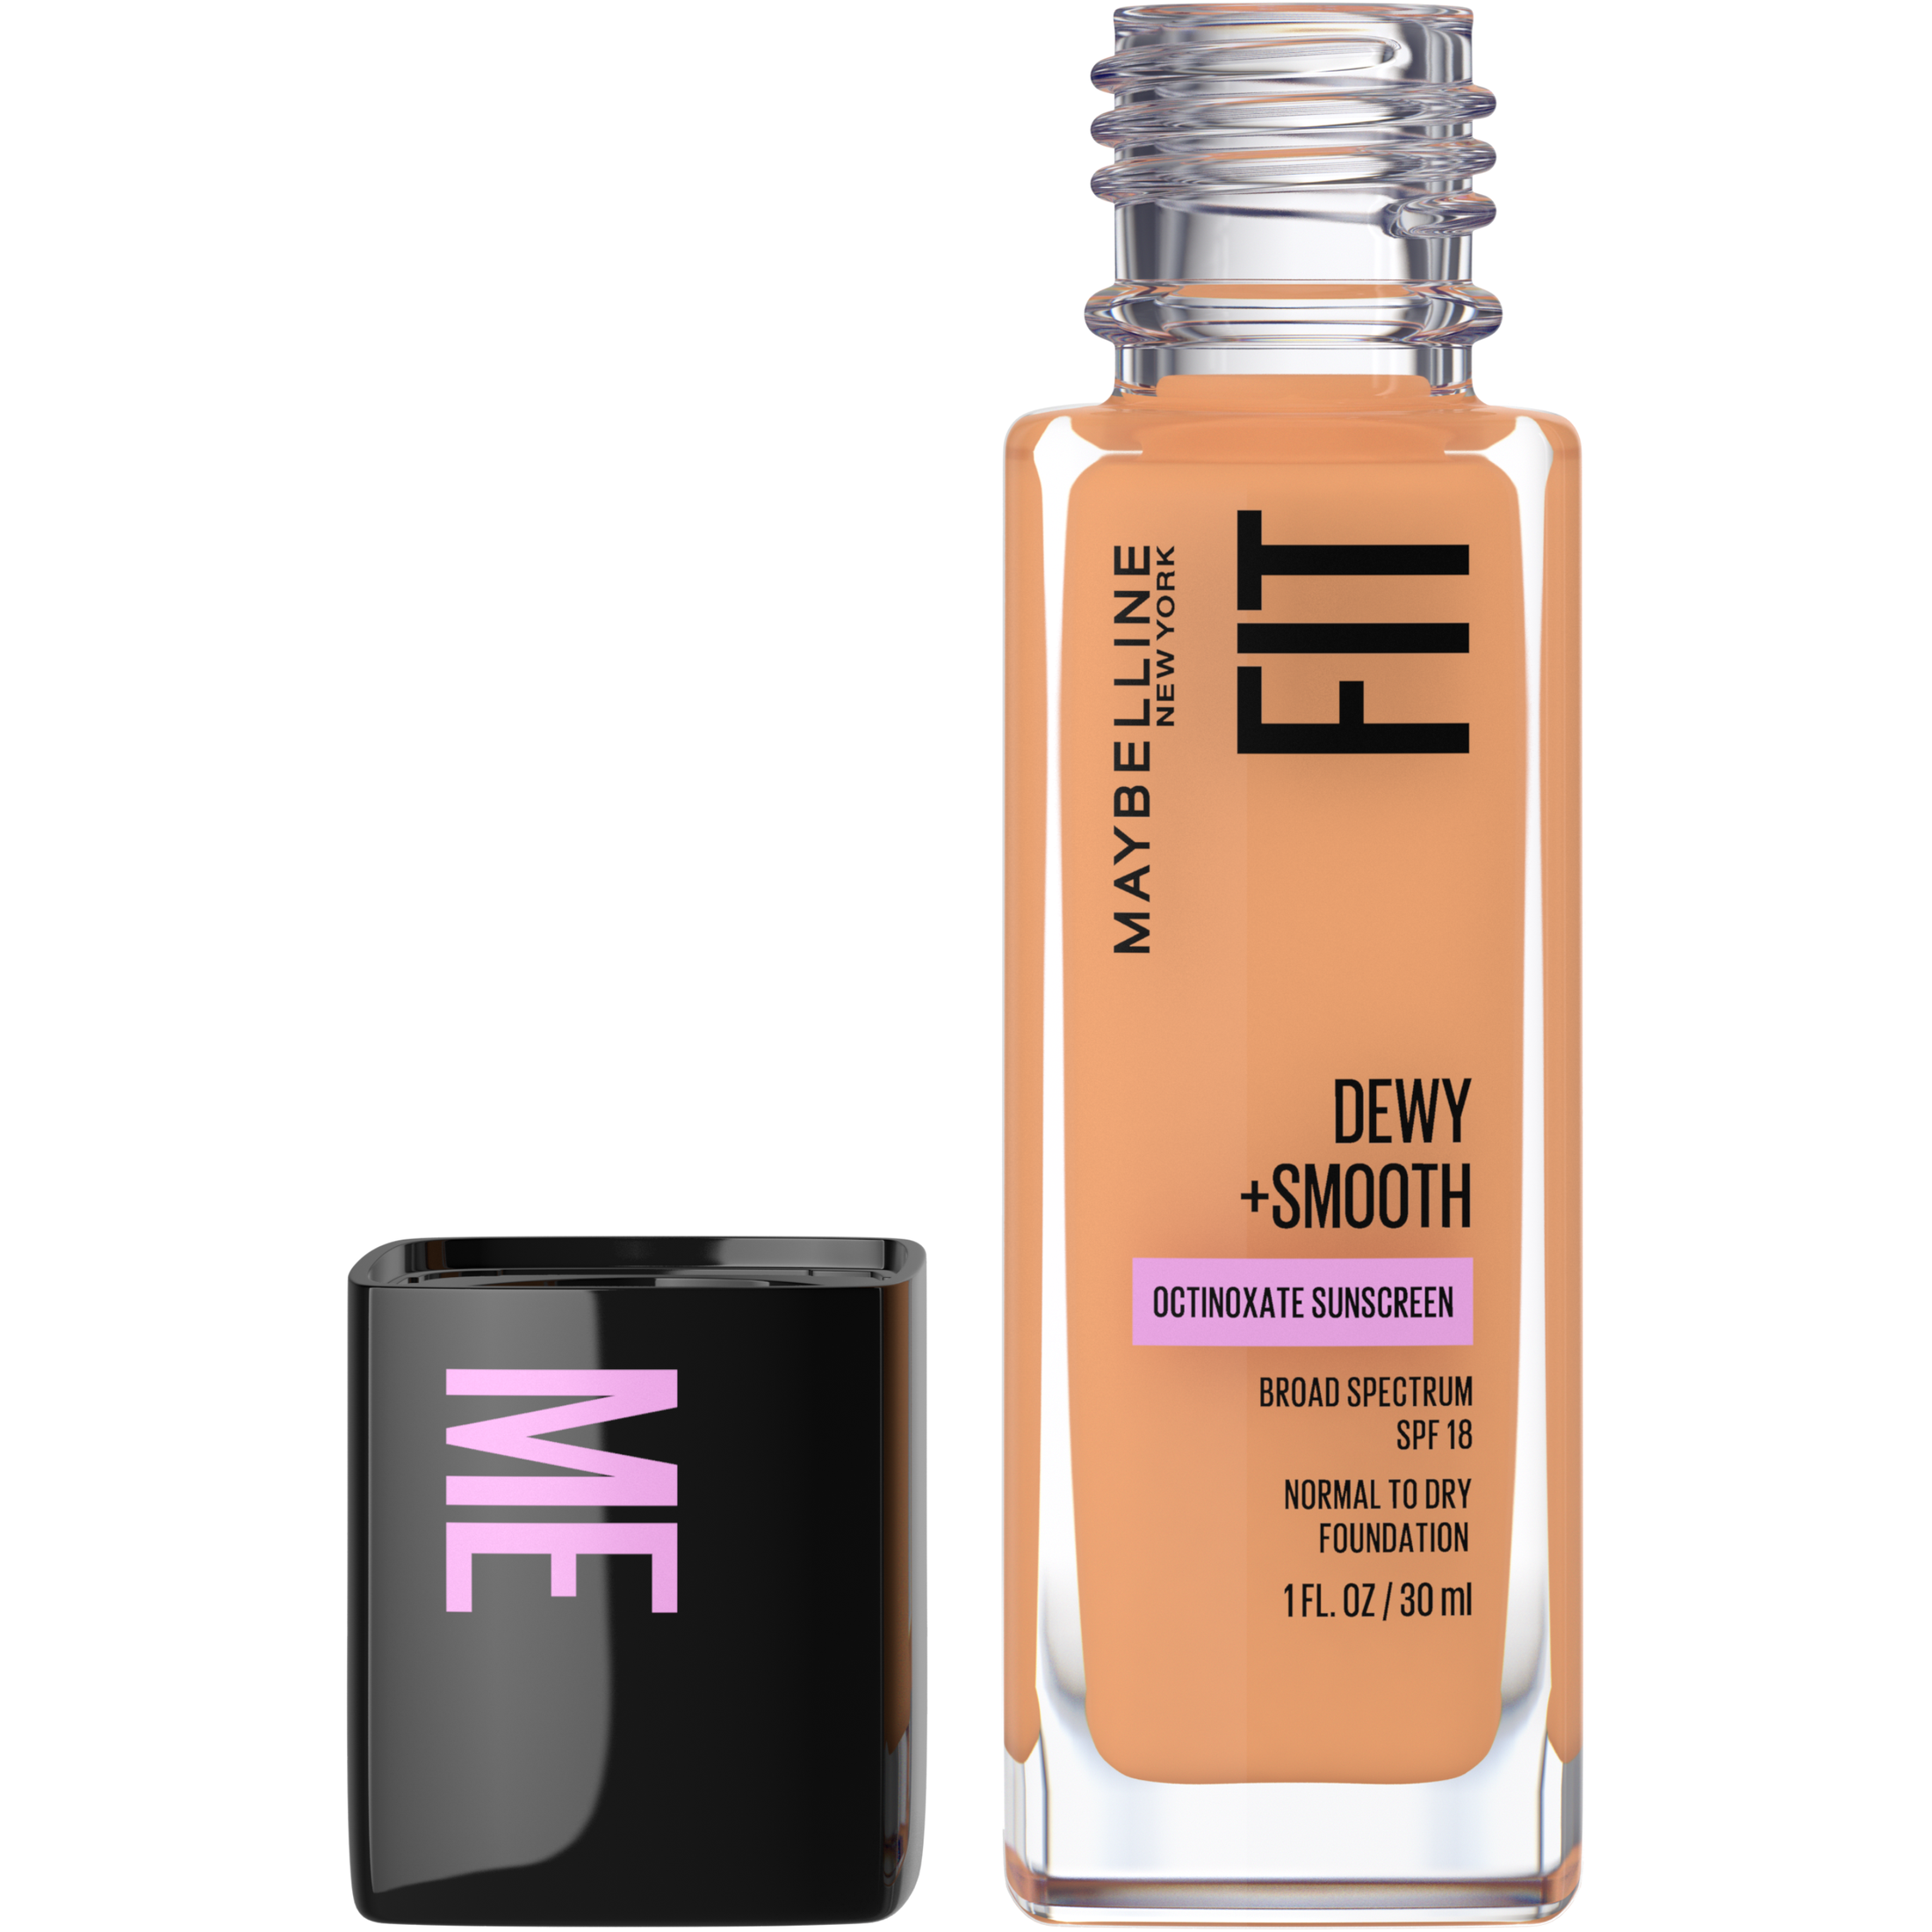 Maybelline Fit Me Dewy and Smooth Liquid Foundation, SPF 18, 322 Warm Honey, 1 fl oz - image 1 of 9